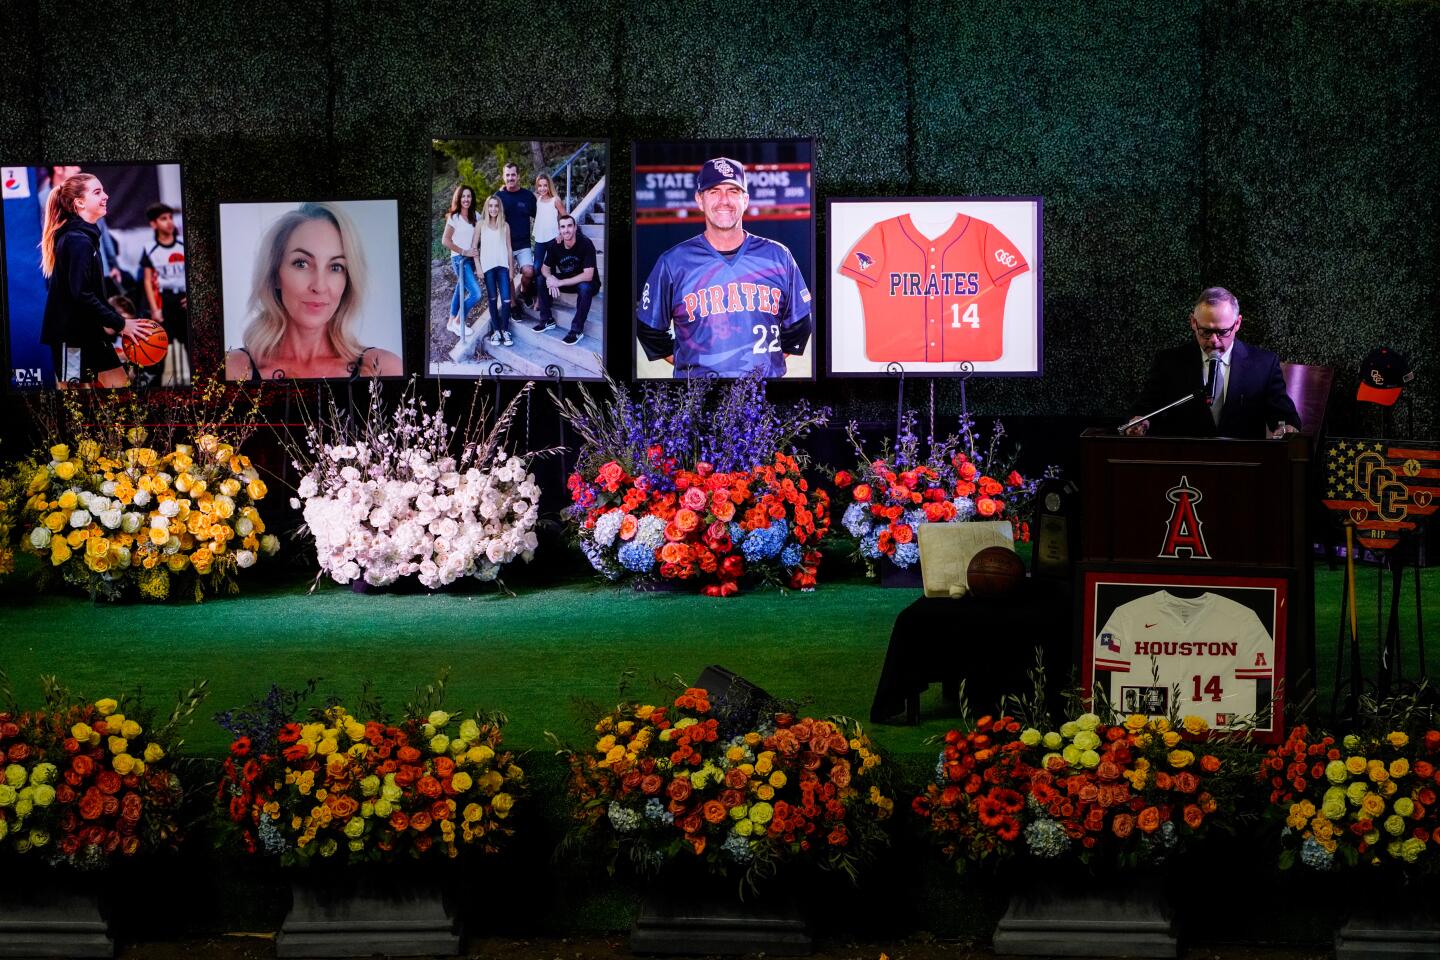 Erik Rees, family friend and Pastor of the Altobelli family speaks during a celebration of life ceremony at Angel Stadium on Monday to honor the lives of John, Keri and Alyssa Altobelli.